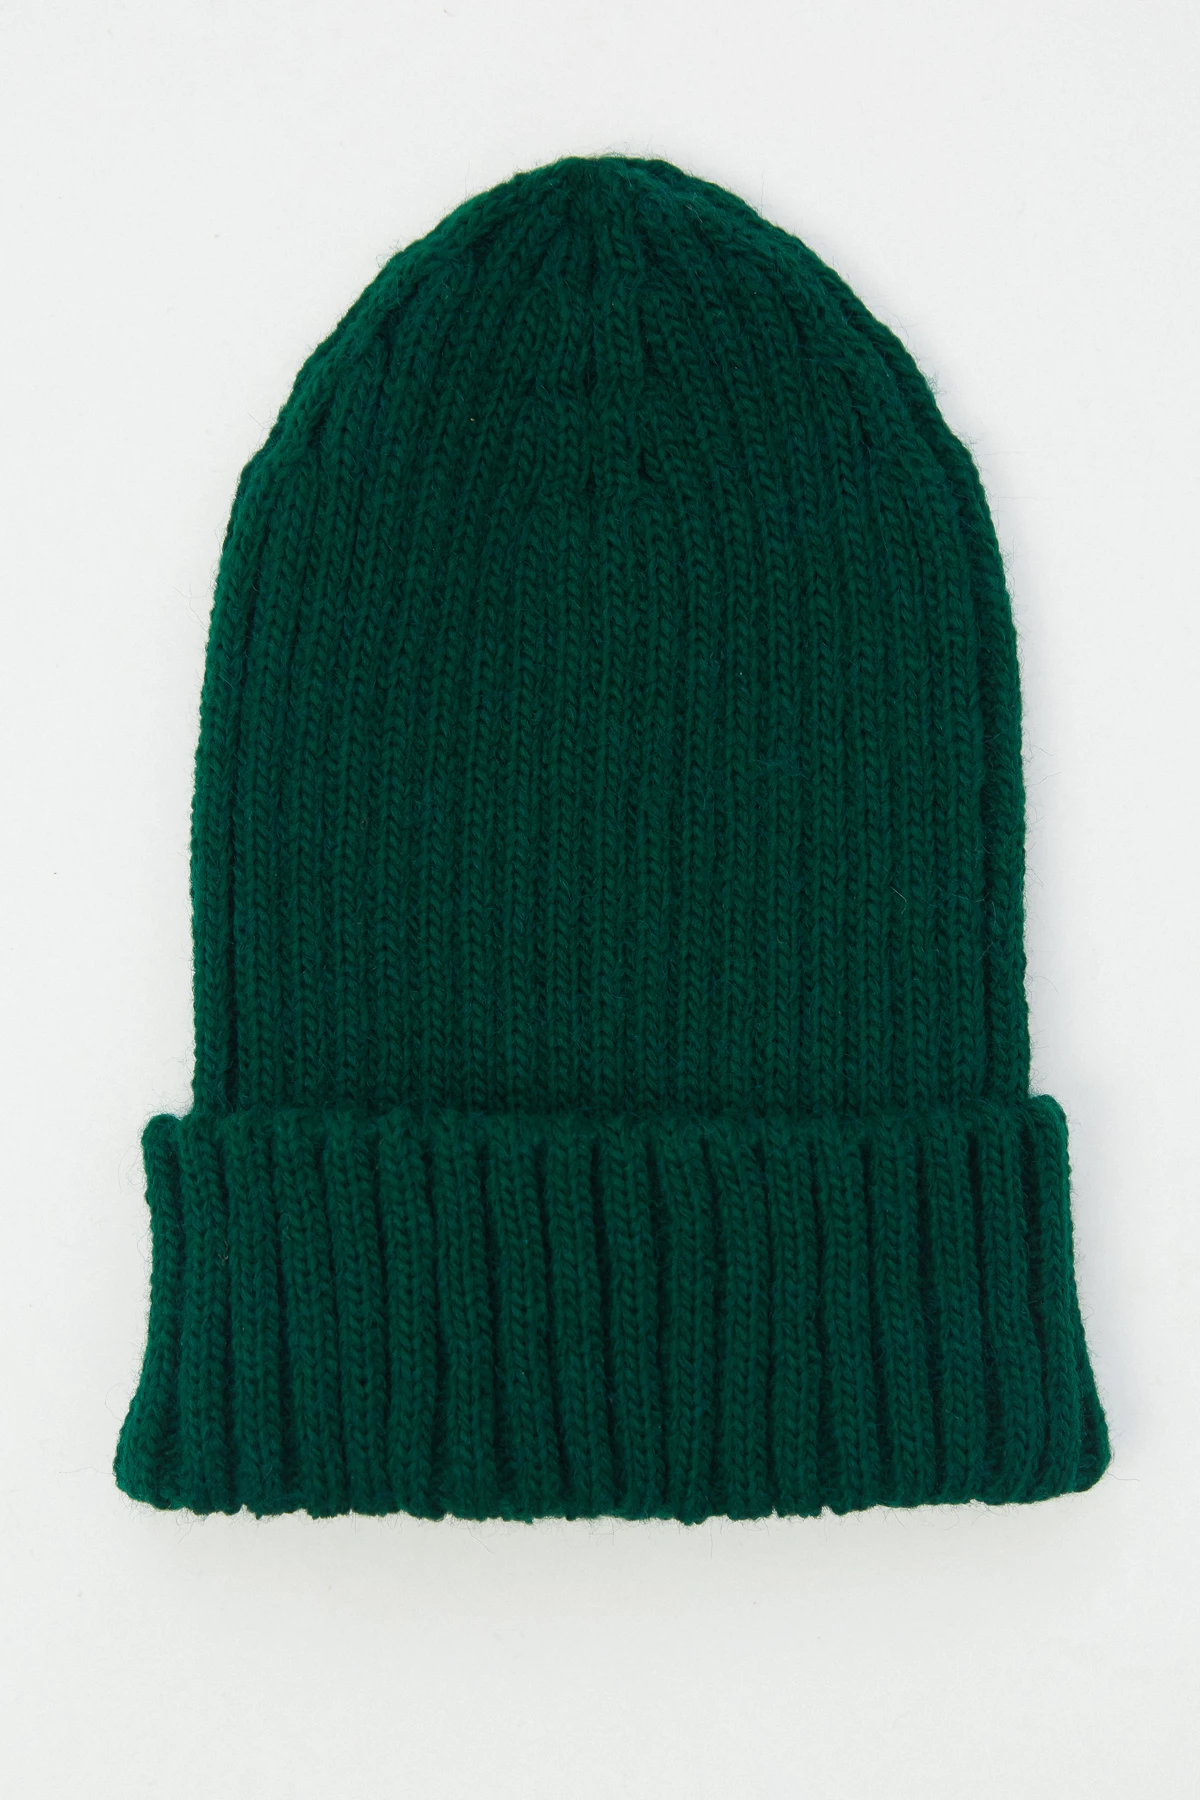 Green knitted wool beanie hat with a lapel, photo 2